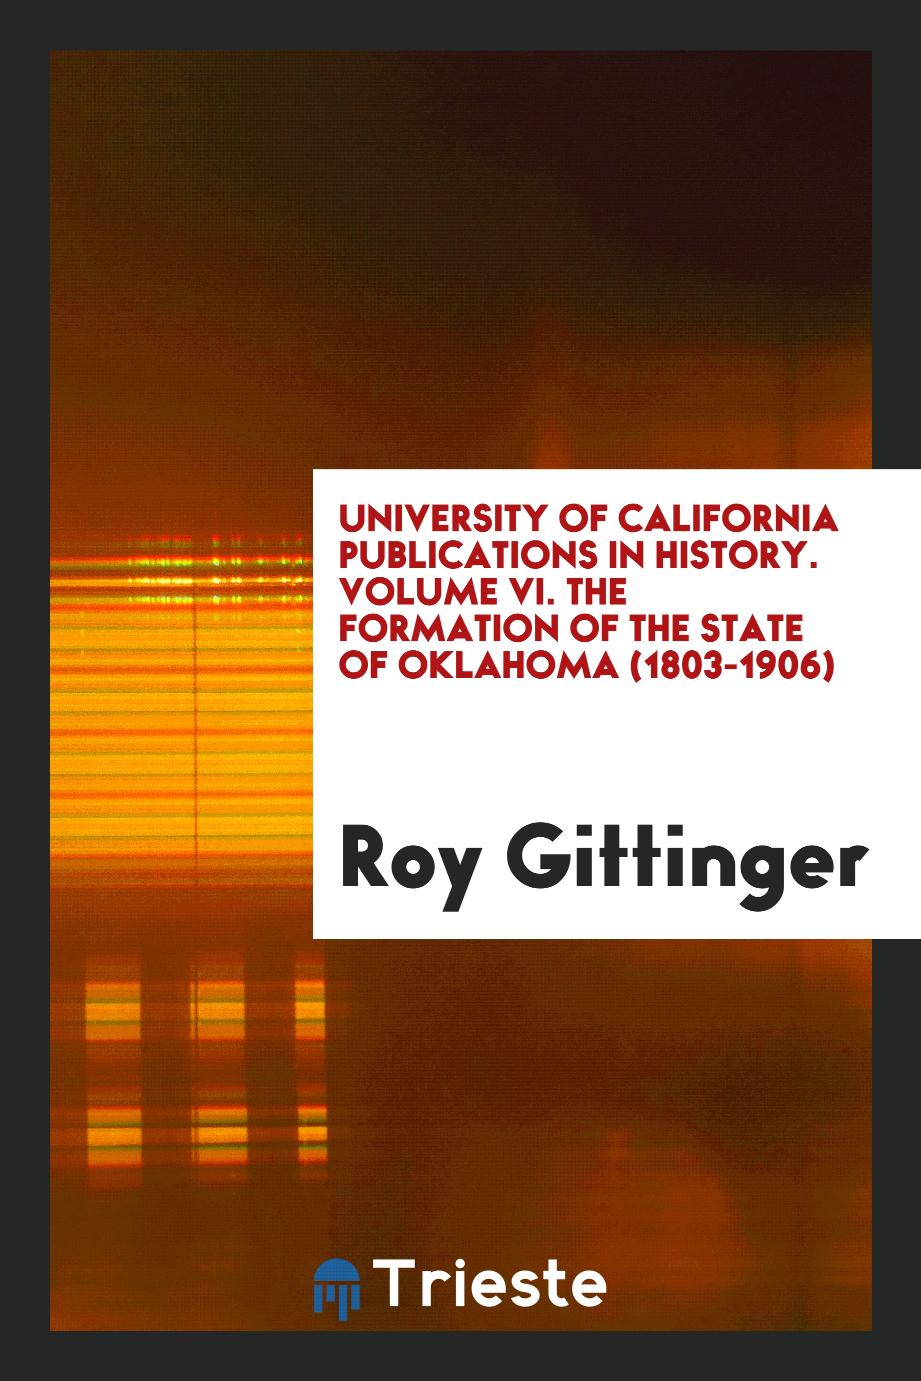 University of California Publications in History. Volume VI. The Formation of the State of Oklahoma (1803-1906)